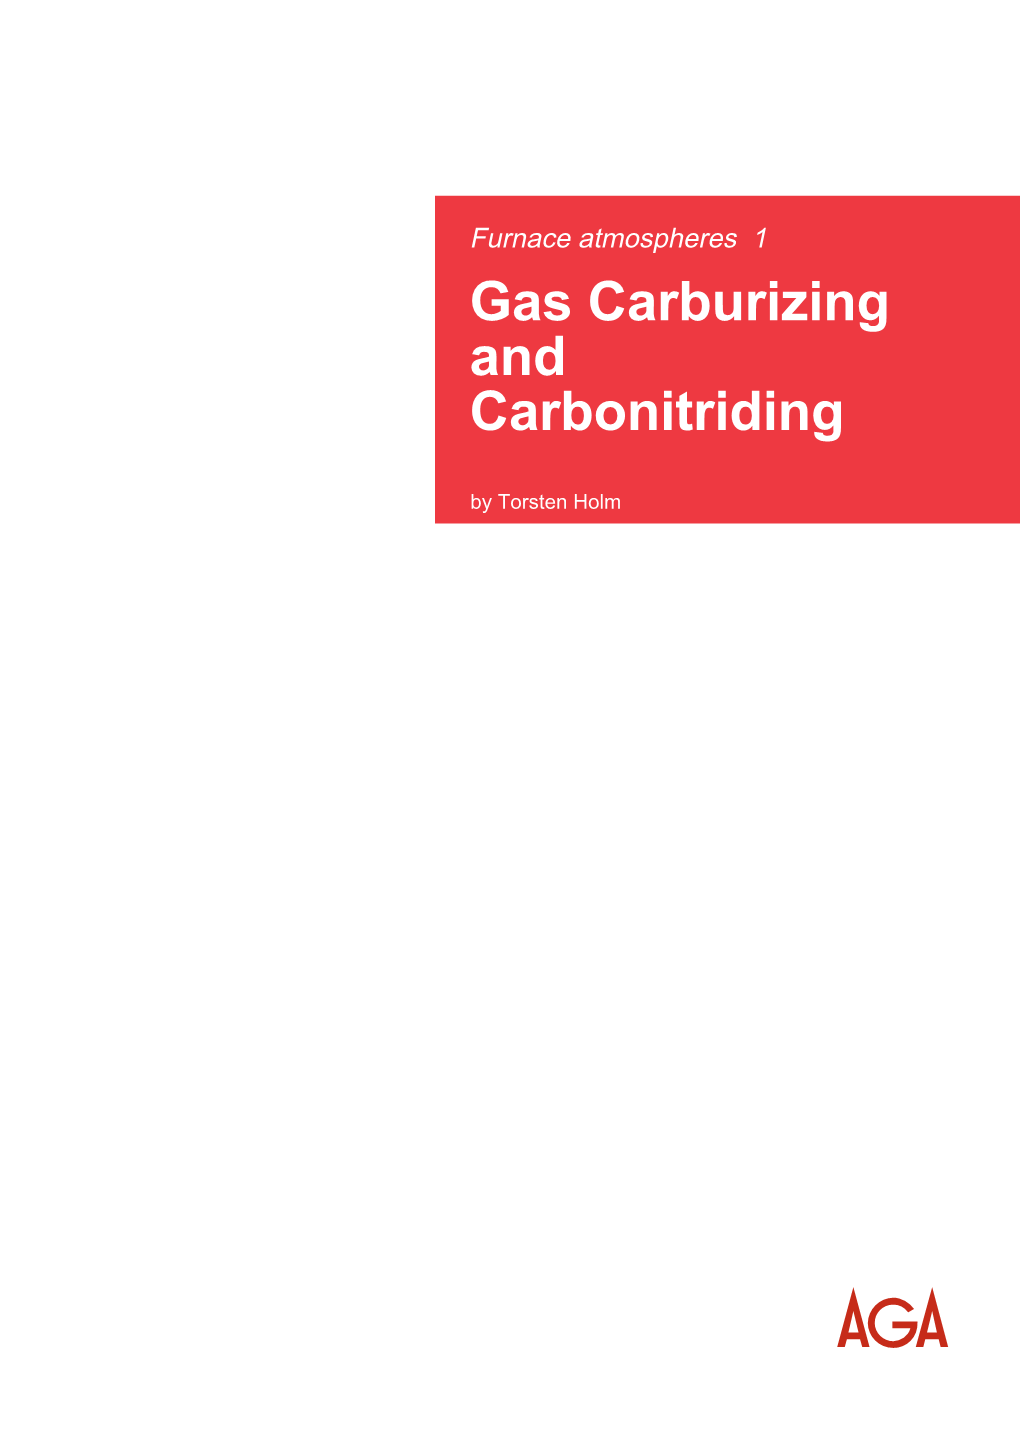 Gas Carburizing and Carbonitriding by Torsten Holm